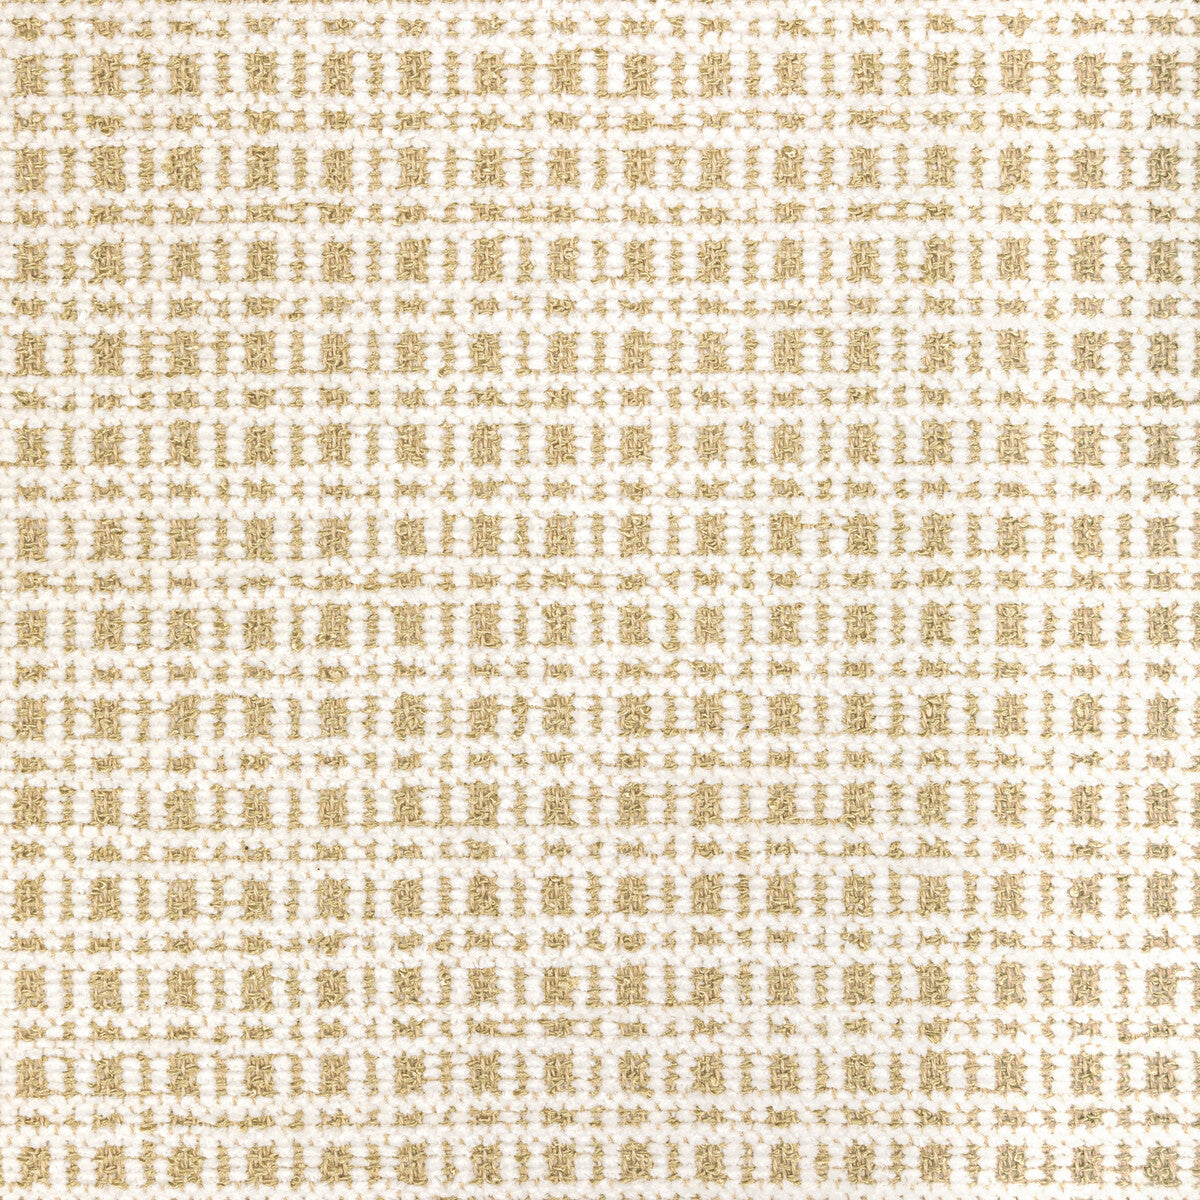 Landiers Texture fabric in ivory color - pattern 8022123.1.0 - by Brunschwig &amp; Fils in the Chambery Textures III collection